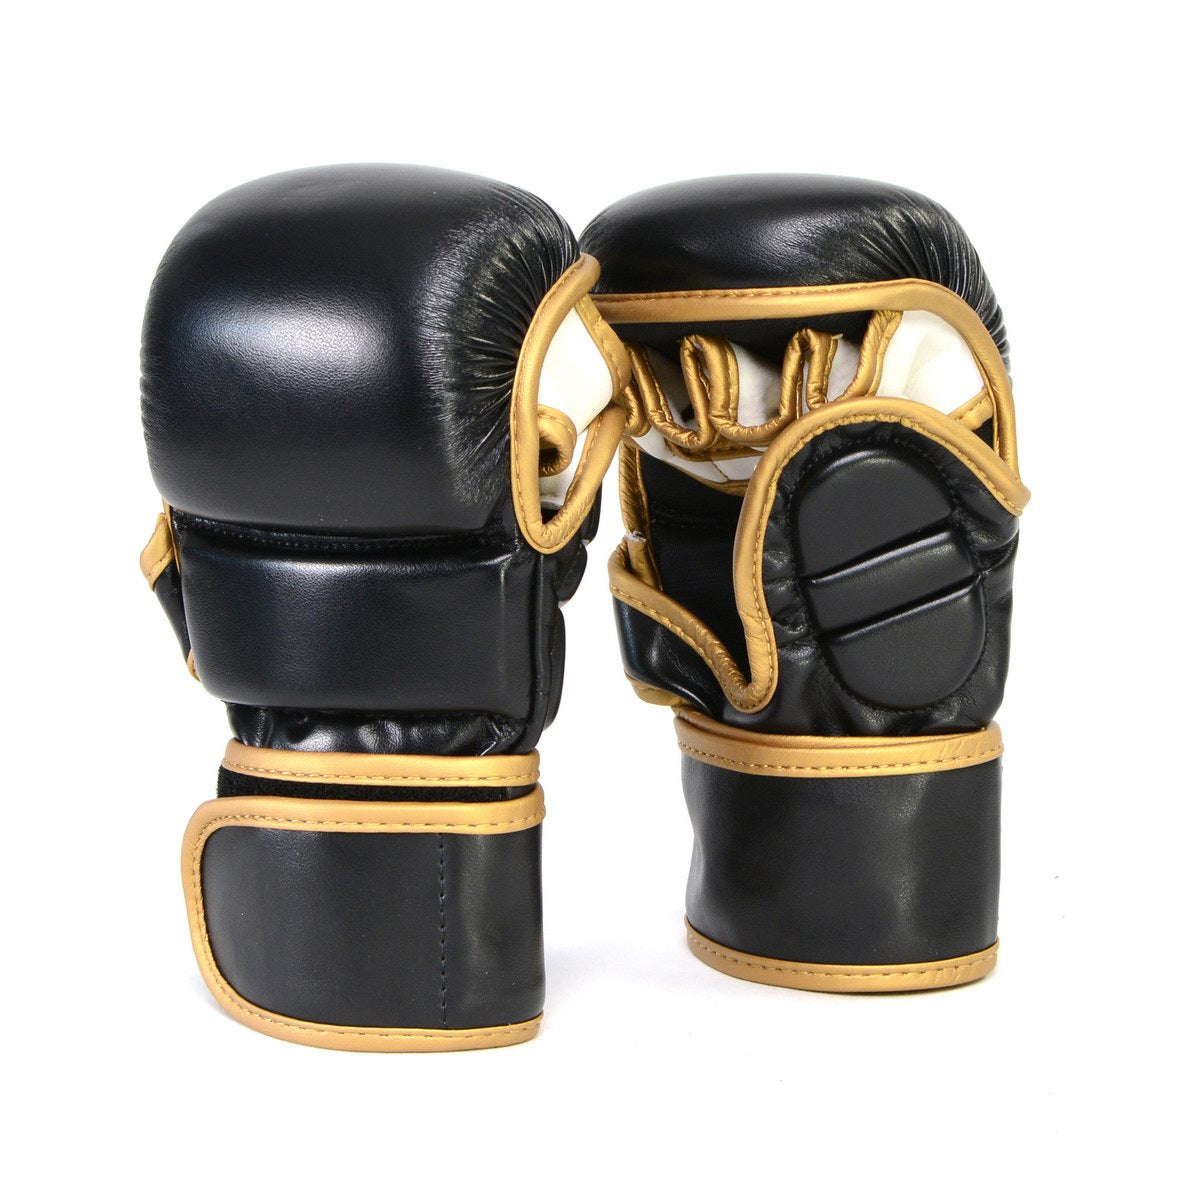 X-Fitness XF2001 7 oz MMA Hybrid Sparring Gloves-BLK/COPPER –